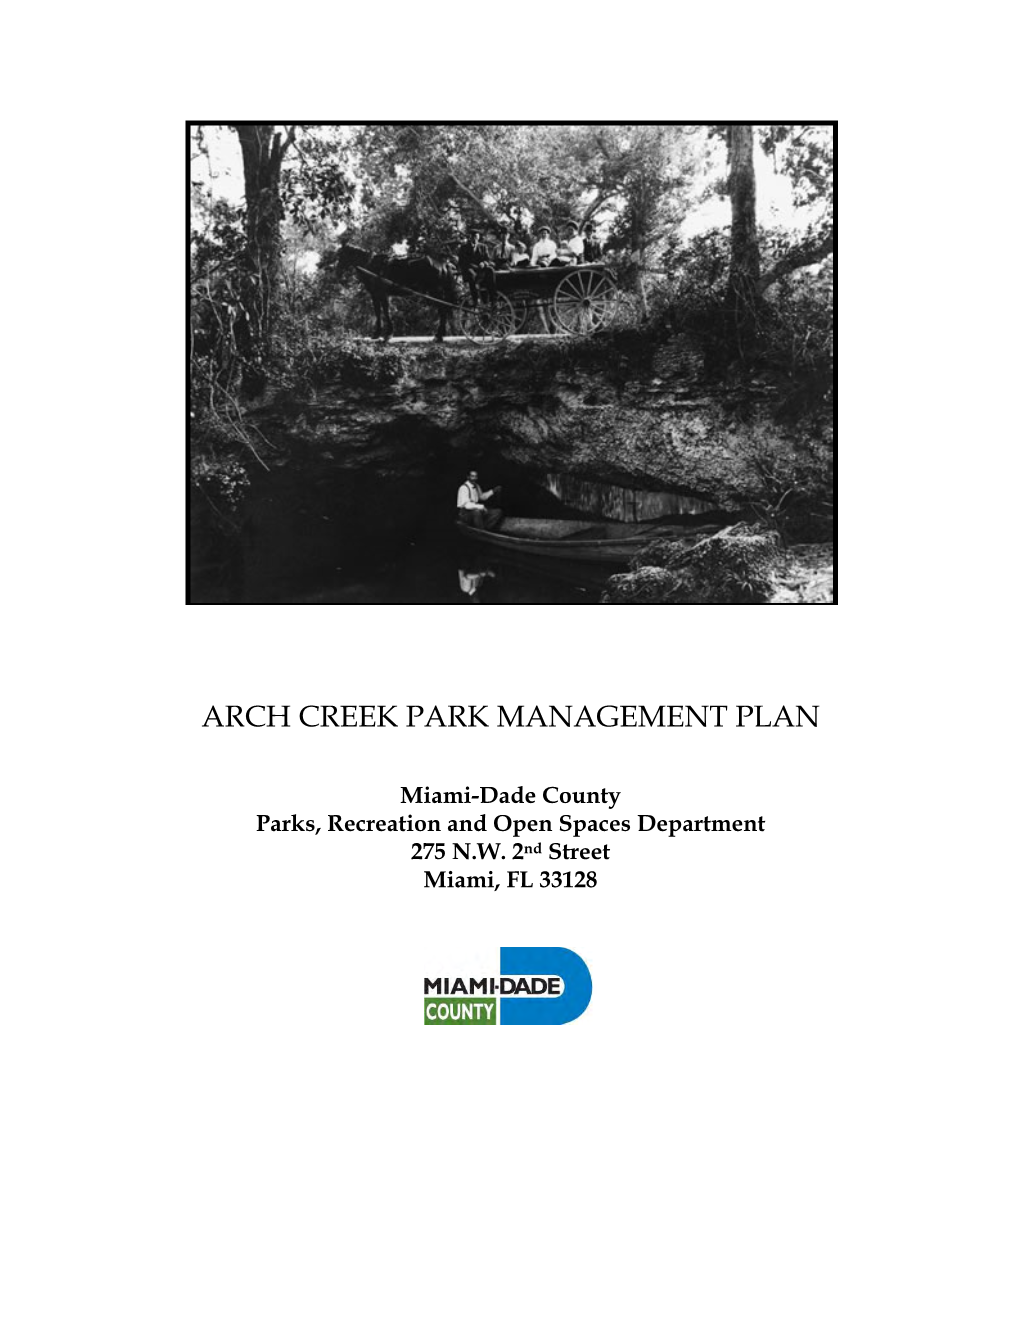 Arch Creek Management Plan Miami-Dade County